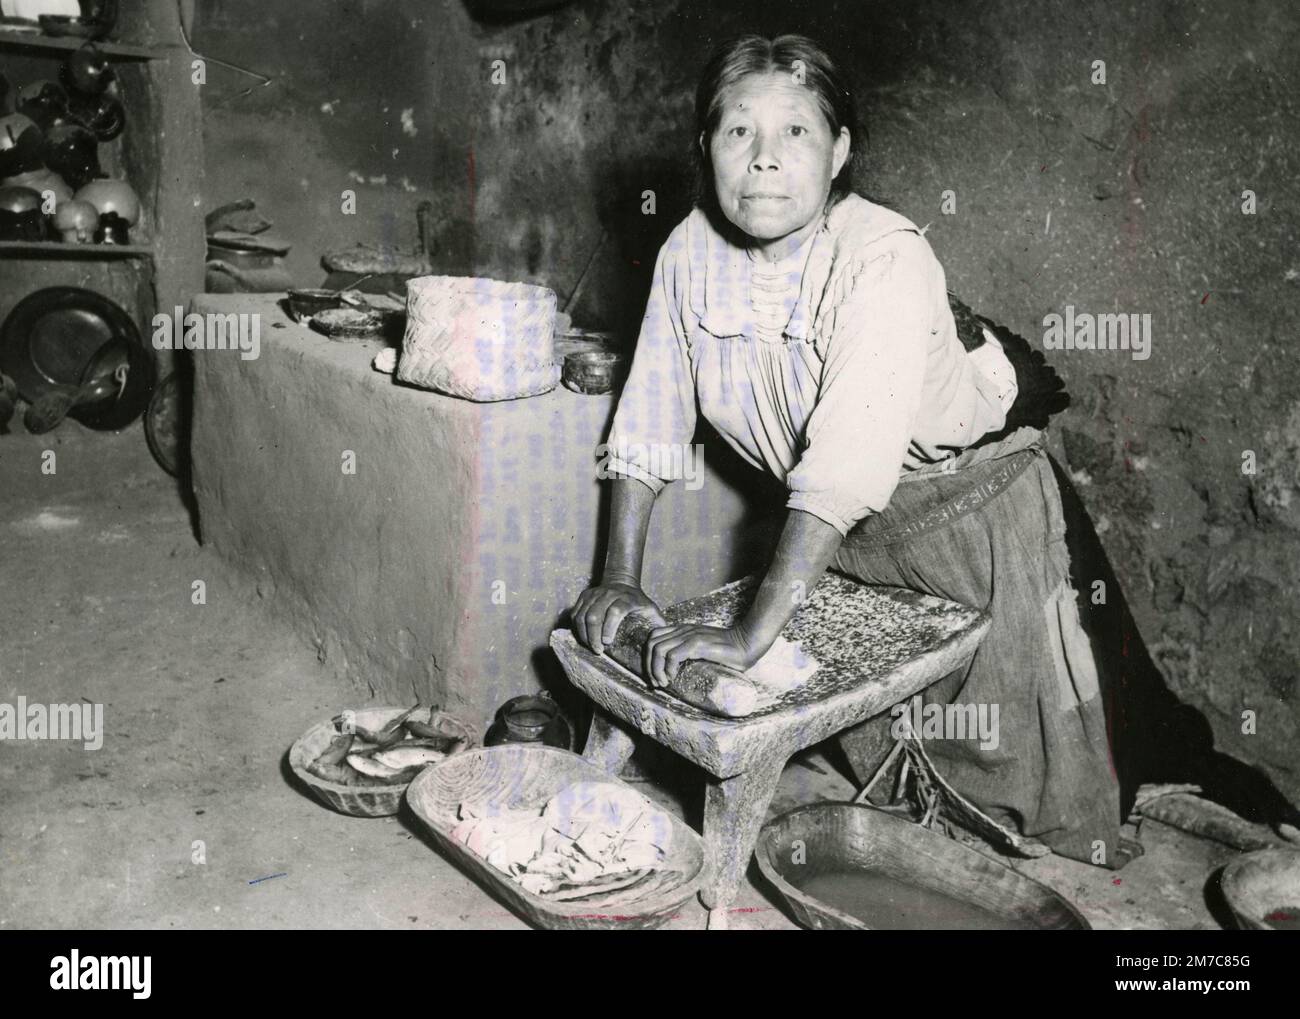 https://c8.alamy.com/comp/2M7C85G/tarascan-woman-grinding-corn-on-the-metate-quern-in-a-village-ihuatzio-mexico-1952-2M7C85G.jpg